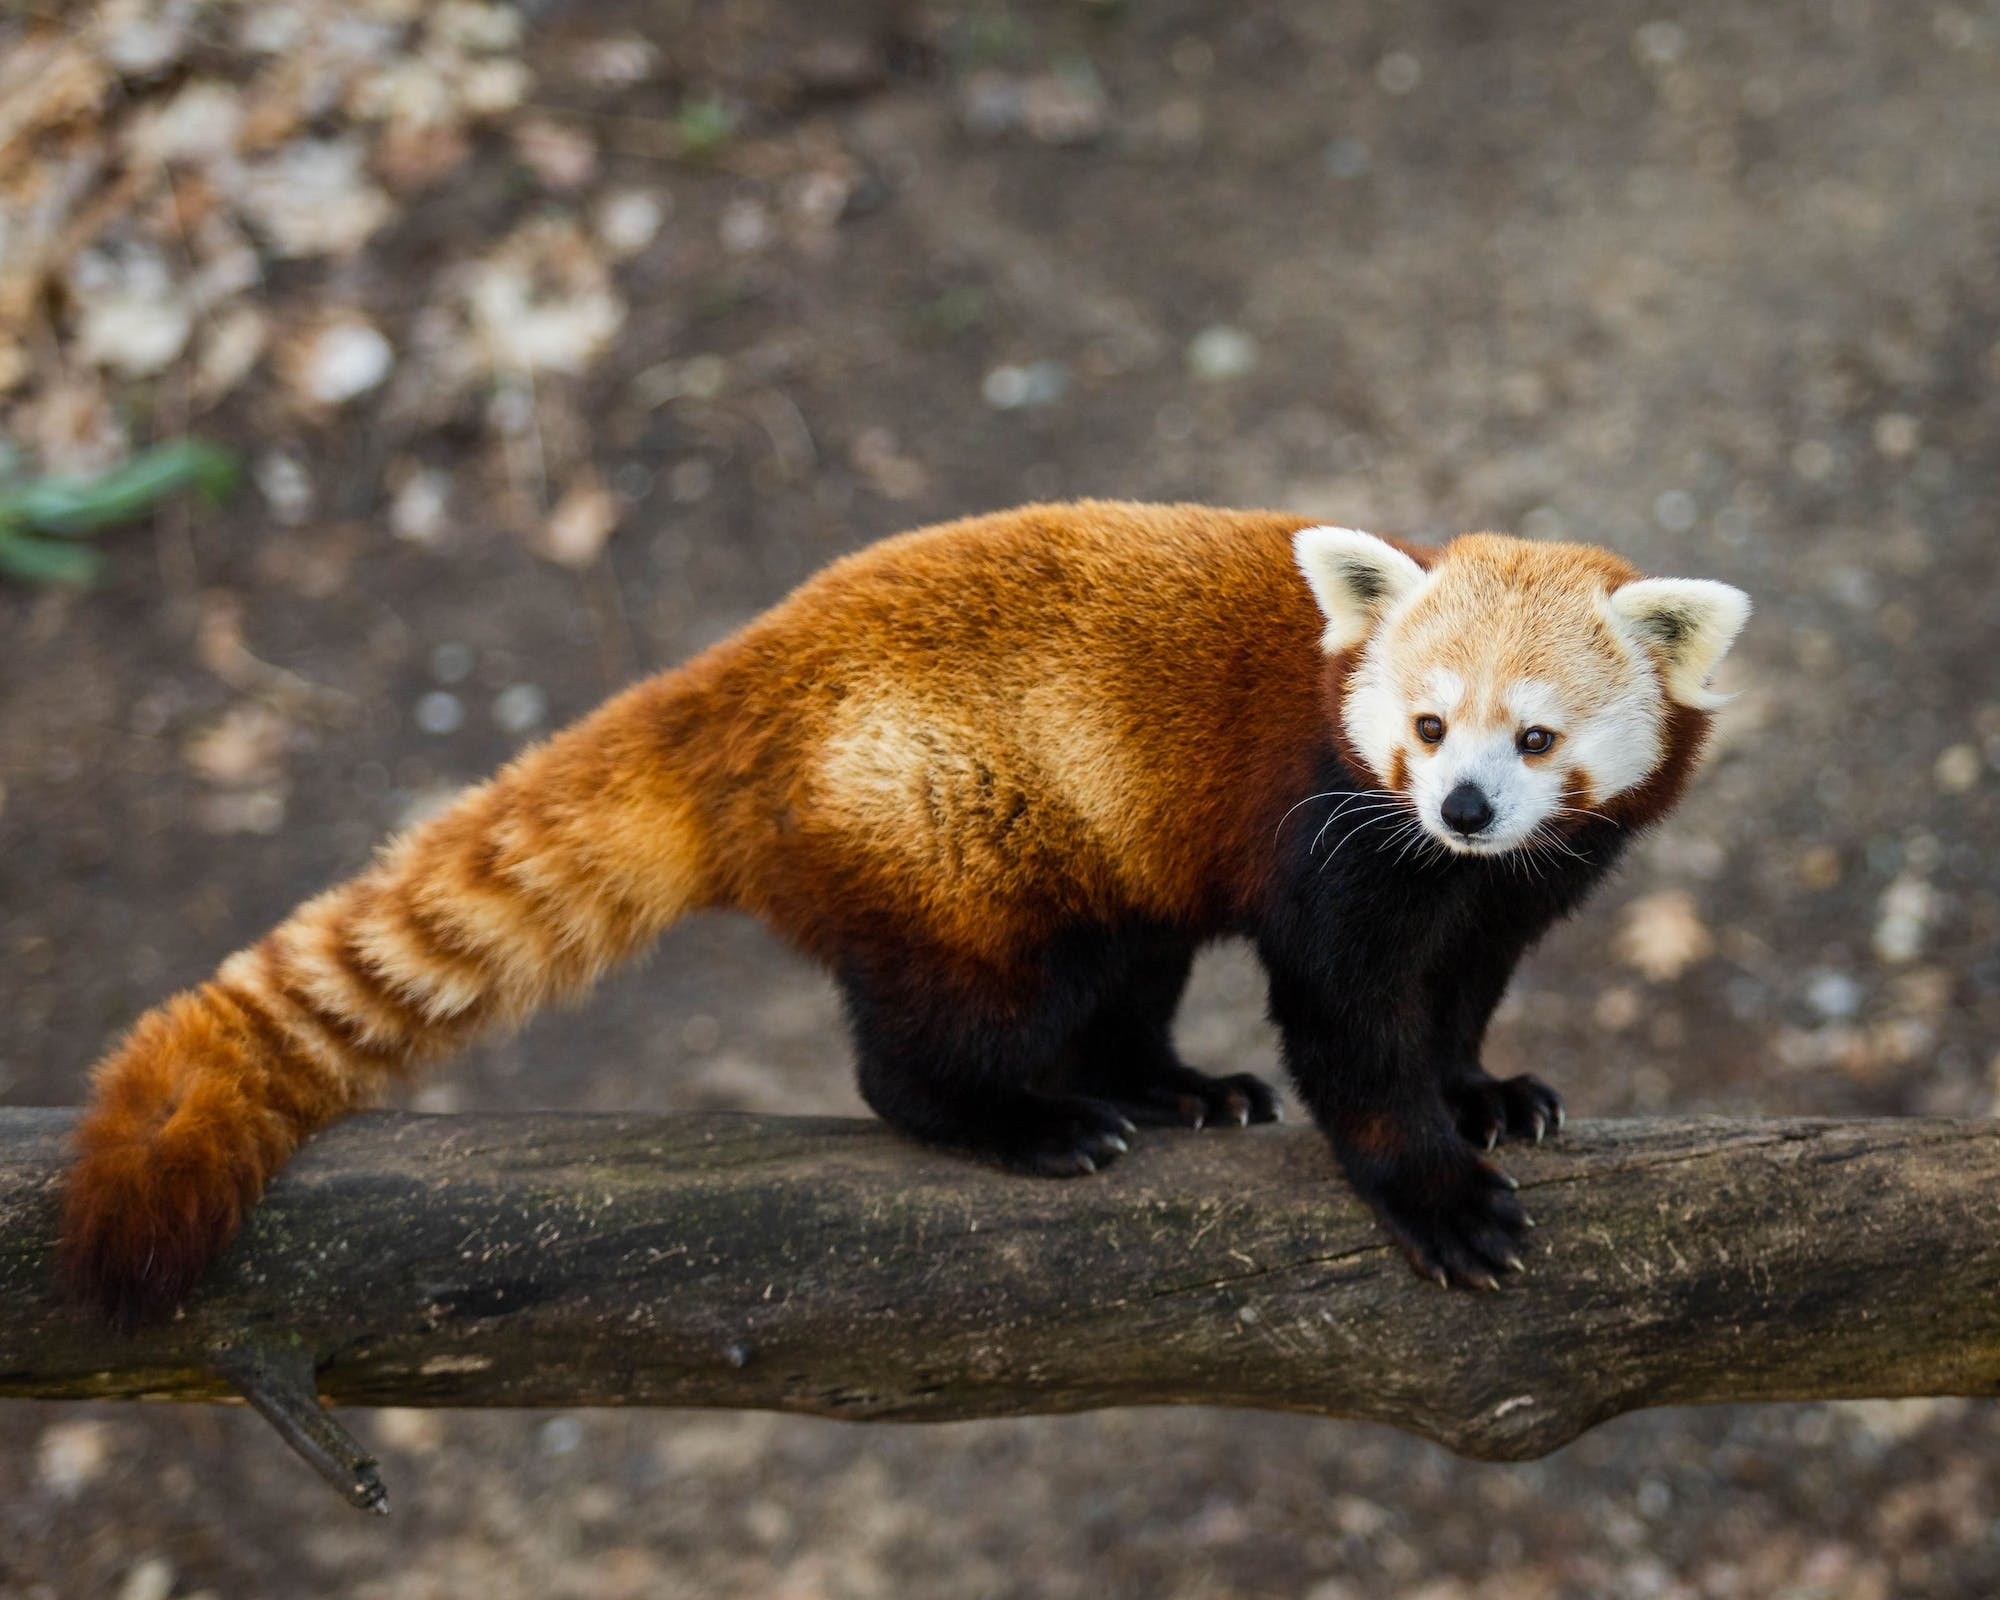 An example of a red panda